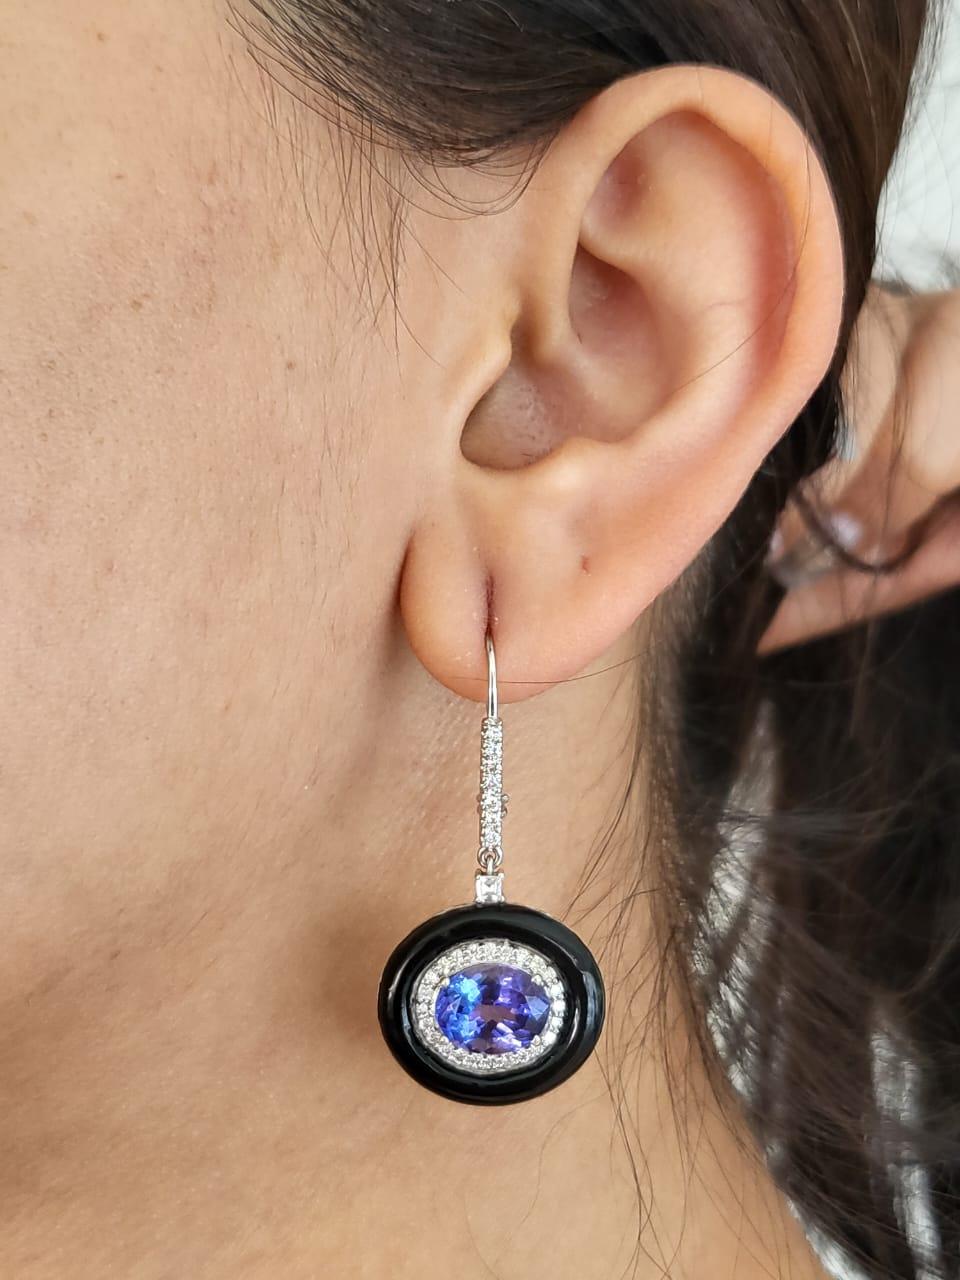 A very gorgeous, Art deco style, Tanzanite & Enamel Dangle Earrings set in 18K White Gold & Diamonds. The weight of the Tanzanite ovals is 6.43 carats. The Tanzanite is responsibly sourced from Tanzania. The weight of the Diamonds is 0.71 carats.